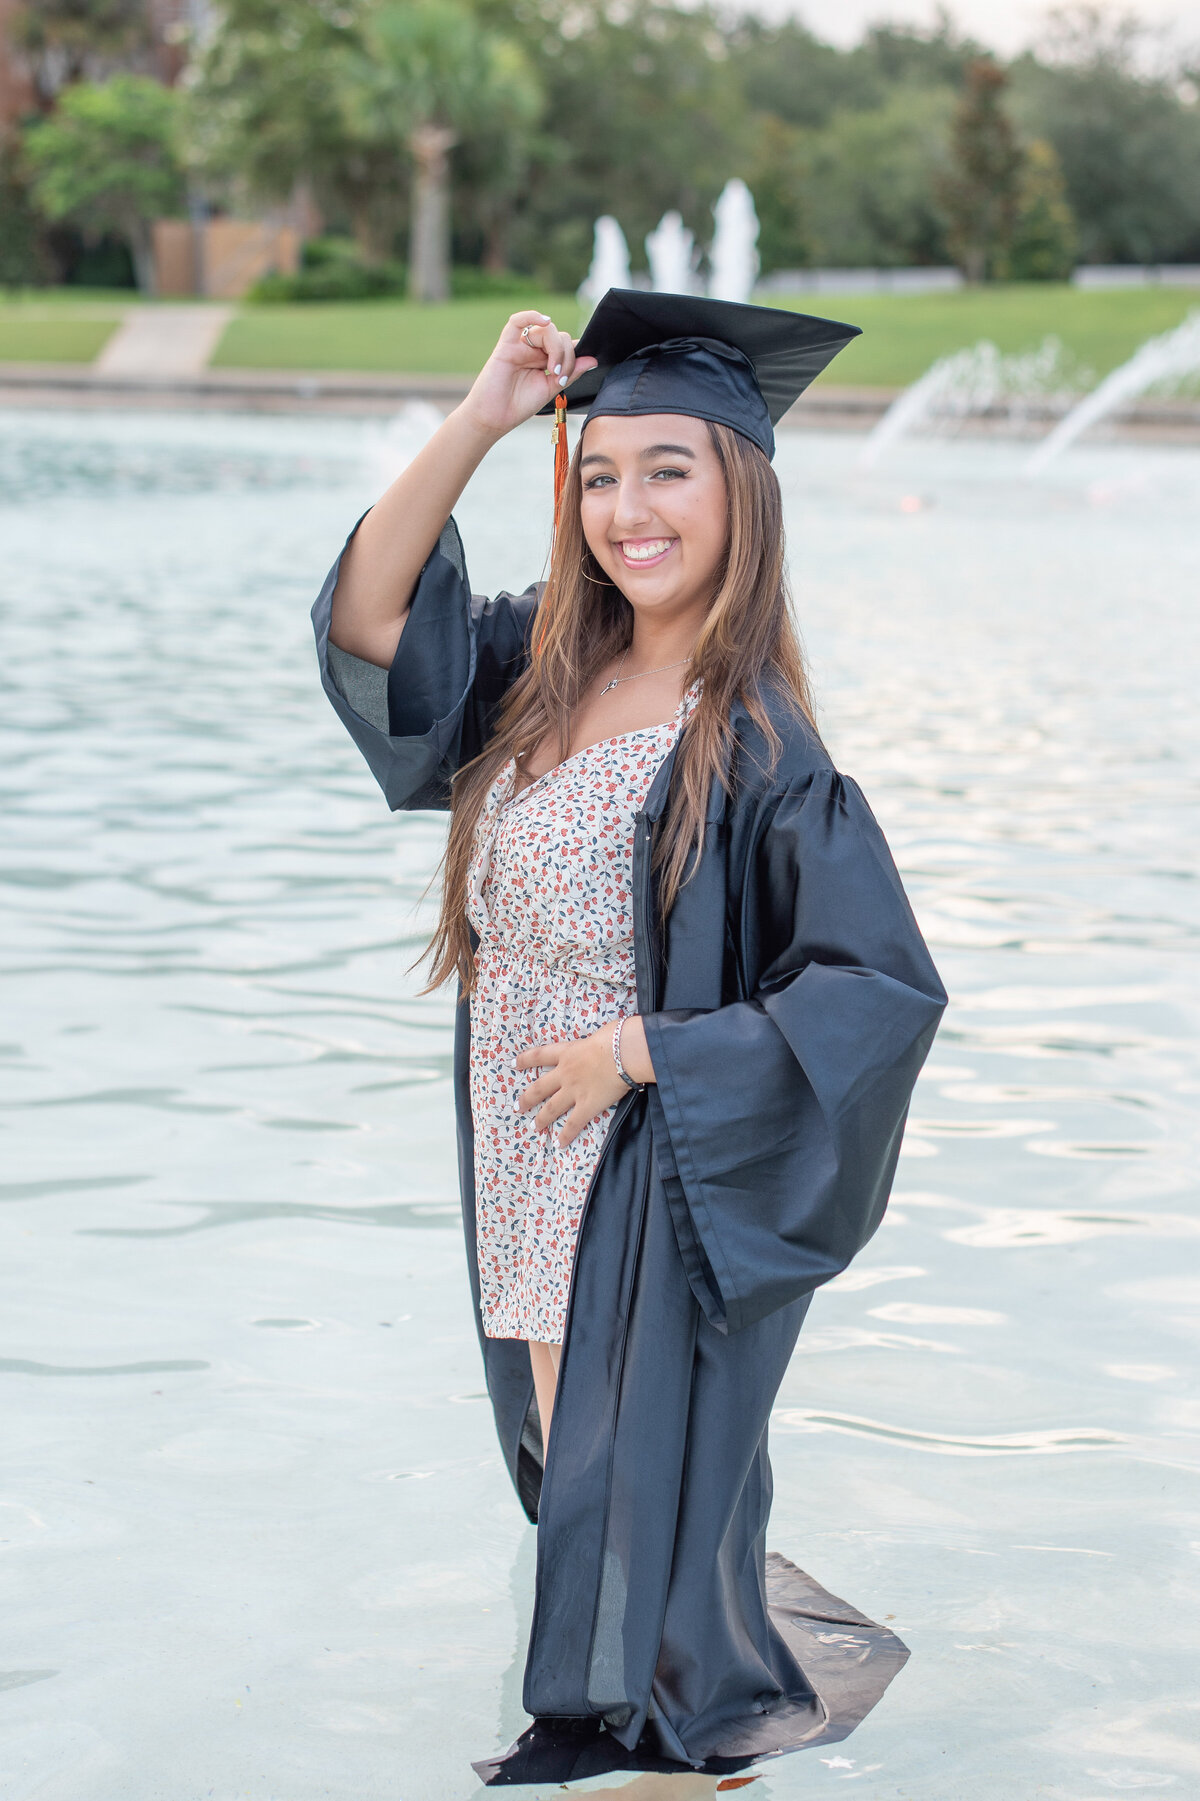 High school senior girl in cap and gown poses in a pond.